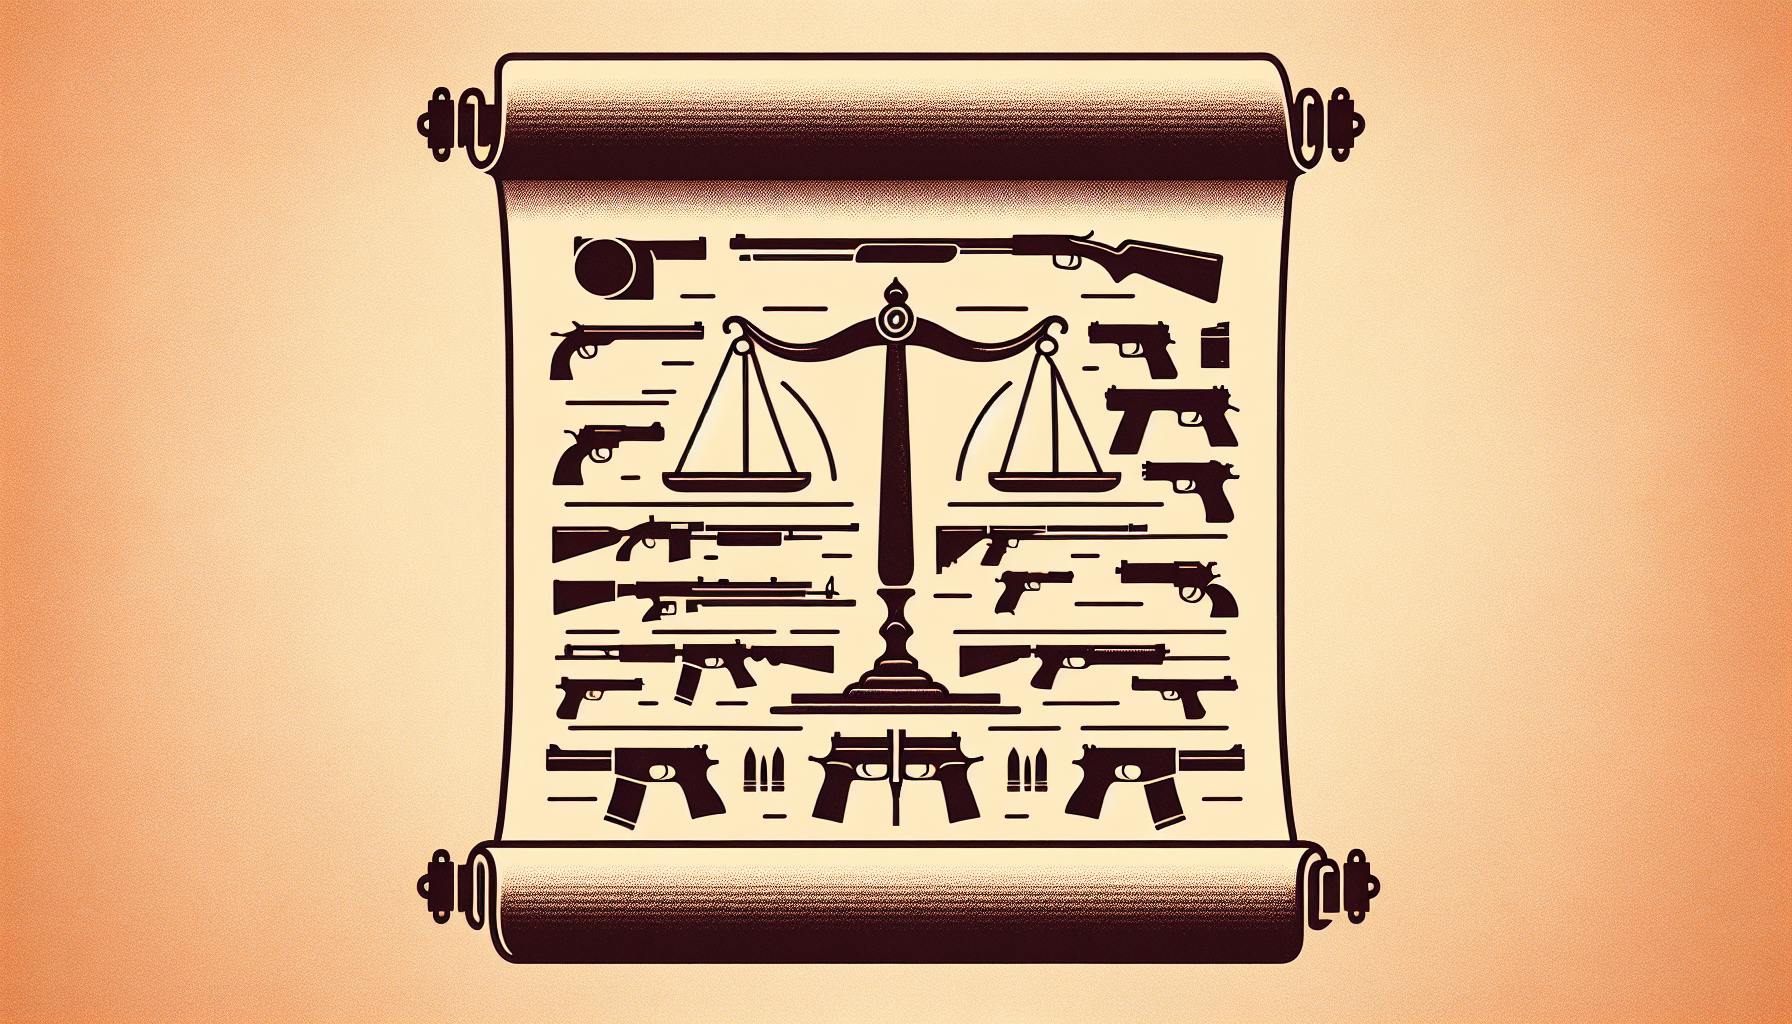 The National Firearms Act: Law Explained